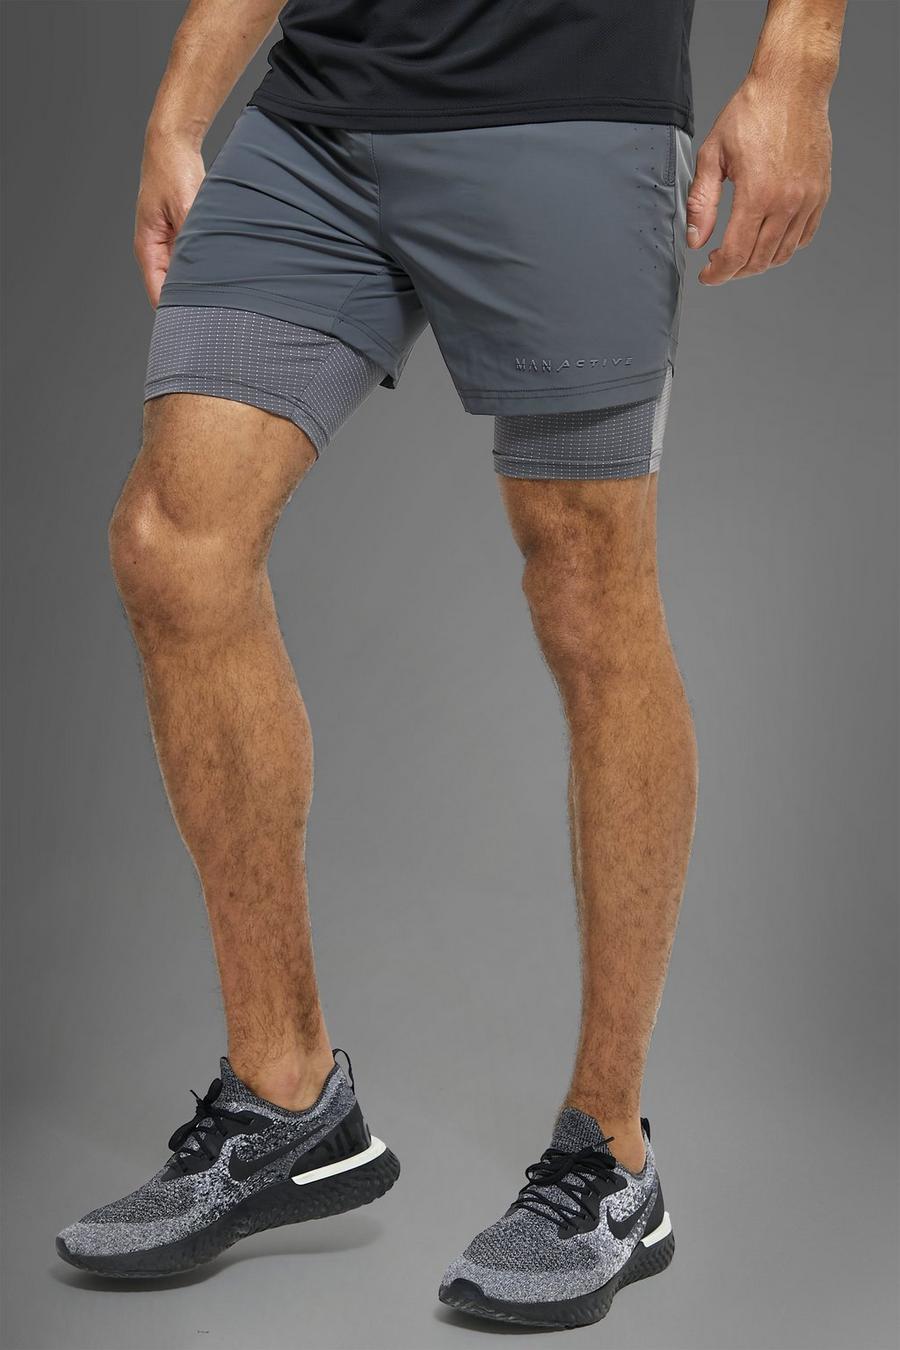 Man Active Gym 2-in-1 Shorts, Charcoal gris